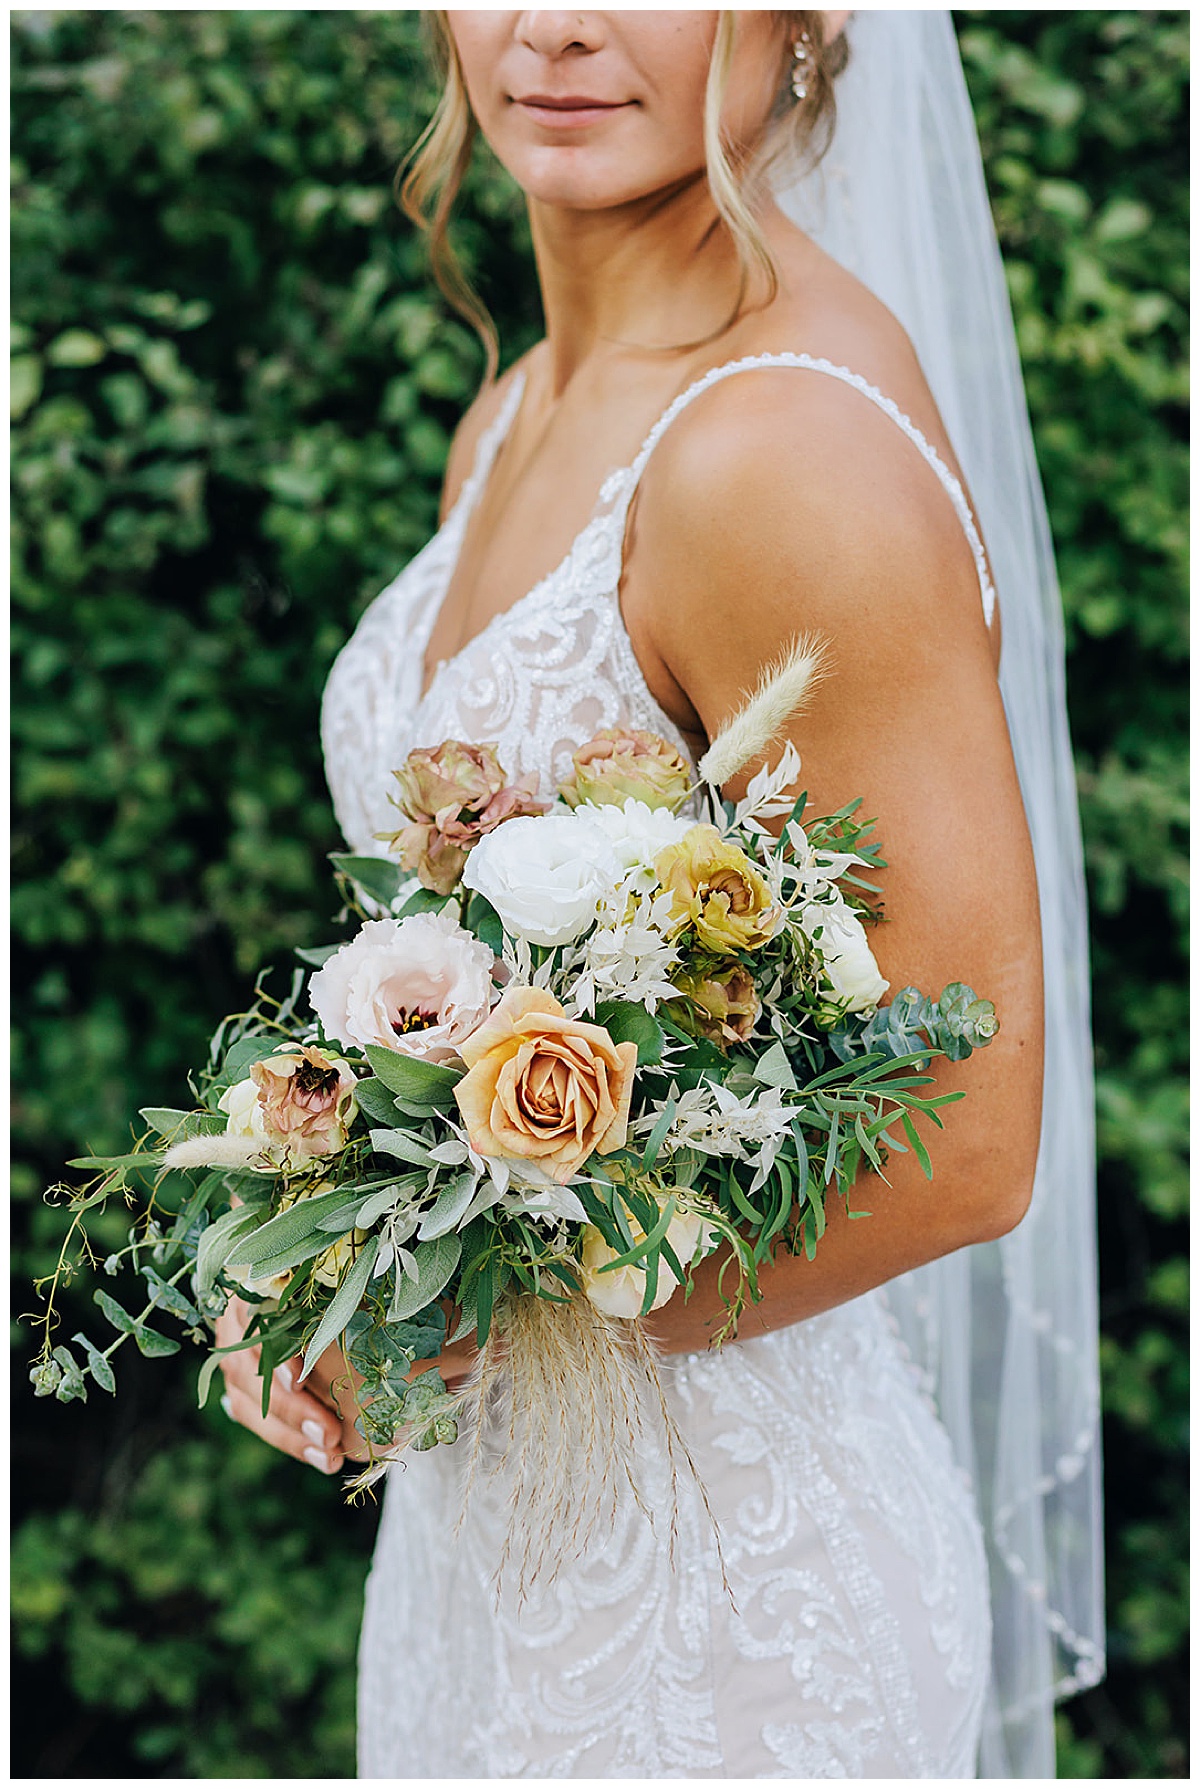 Bouquet of flowers by Kayla Bouren Photography